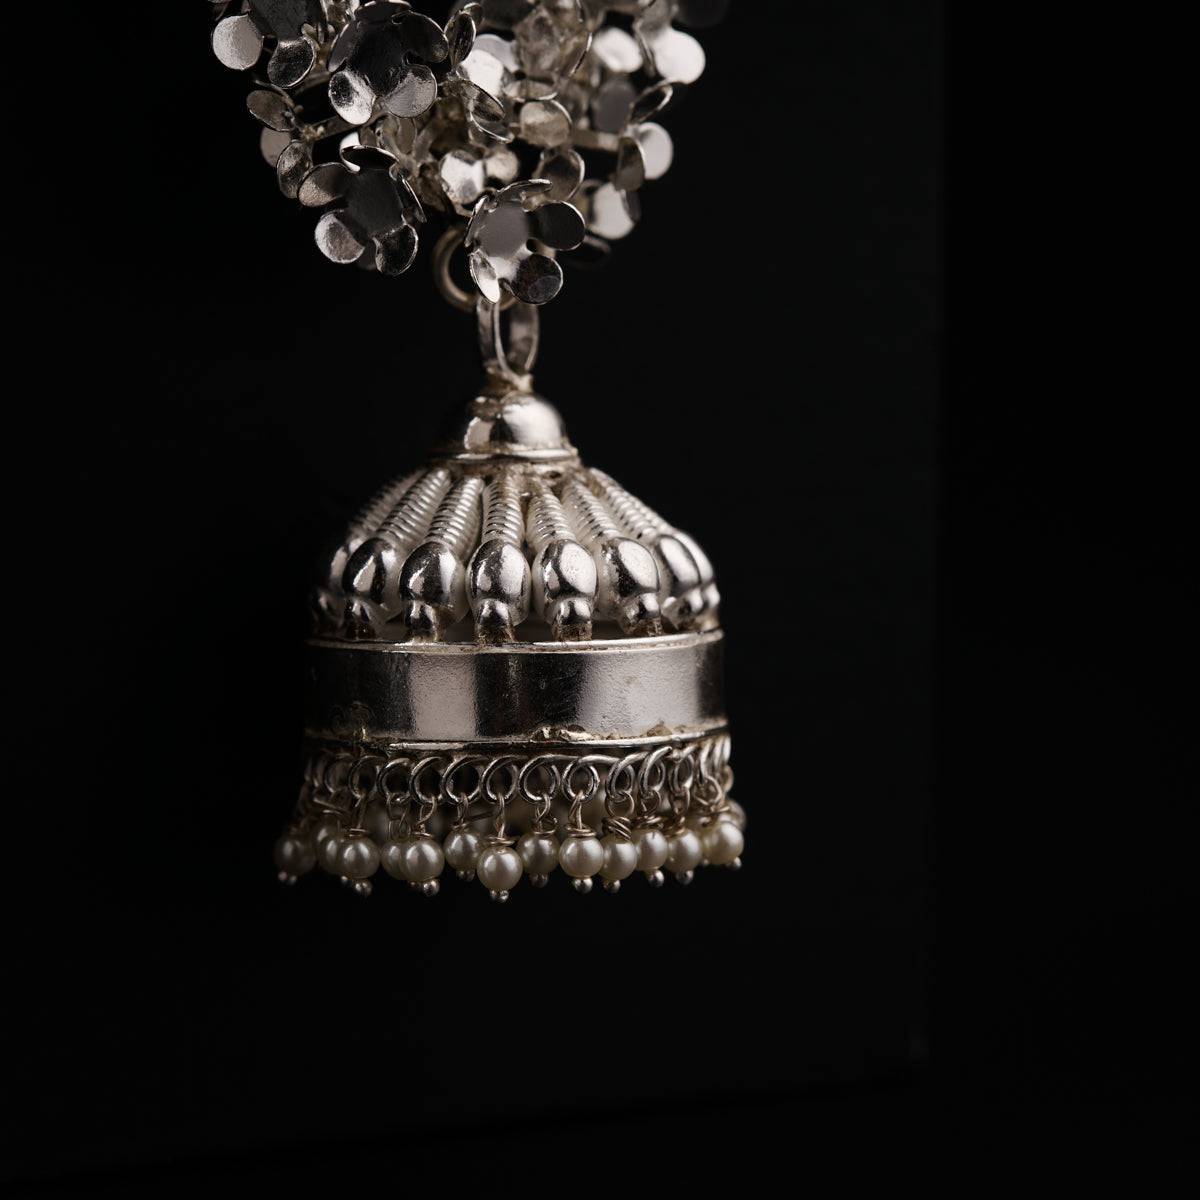 a silver bell with a bunch of beads on top of it